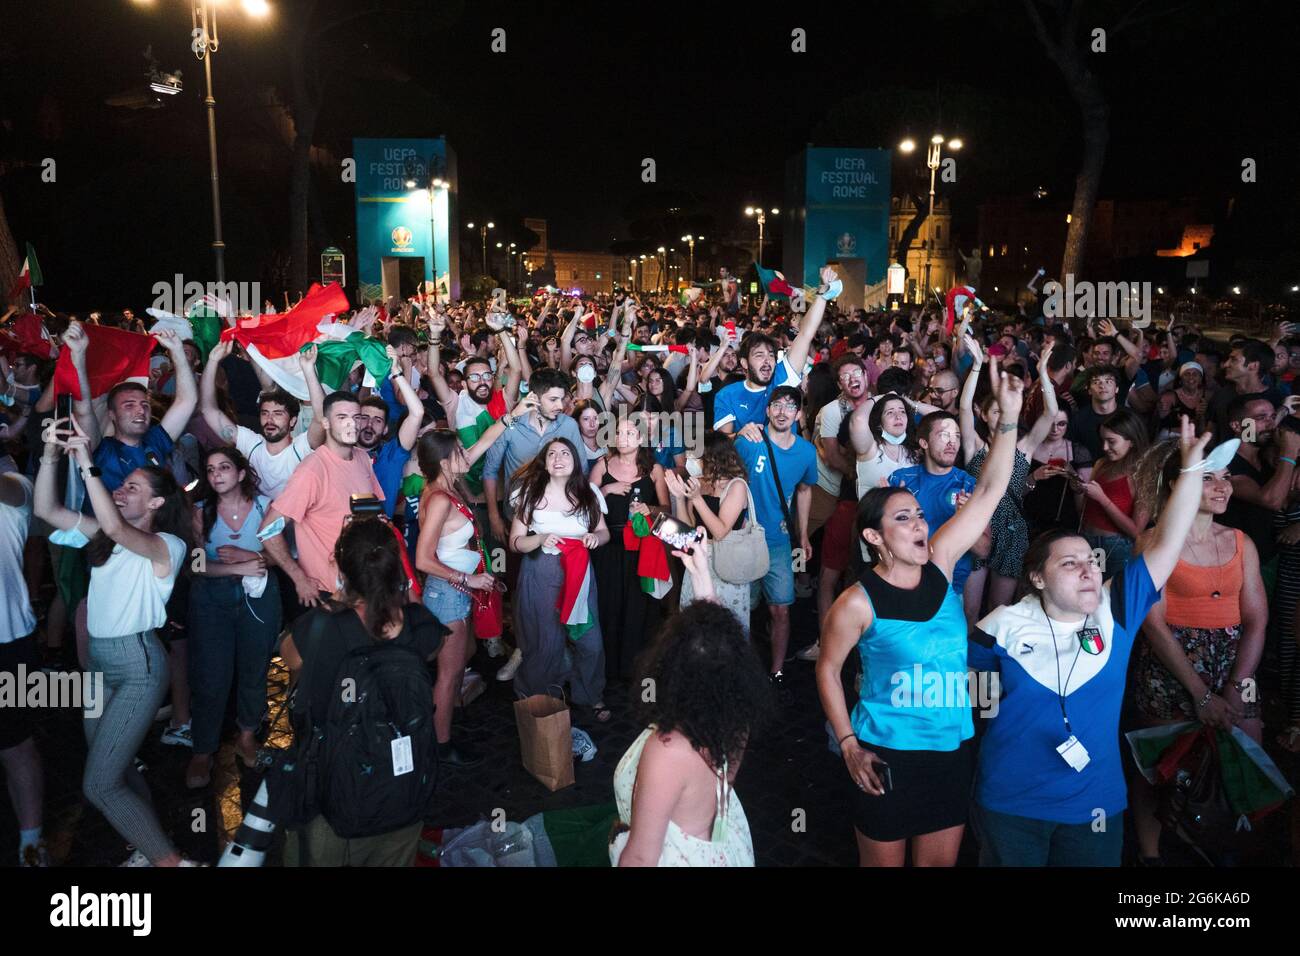 ROME, ITALY - JULY 6, 2021. Italian fans celebrate the victory of Italy against Spain in the semifinal of the Euro 2020 football European Championship. Credit: Andrea Petinari/Medialys Images/Alamy Live News Stock Photo